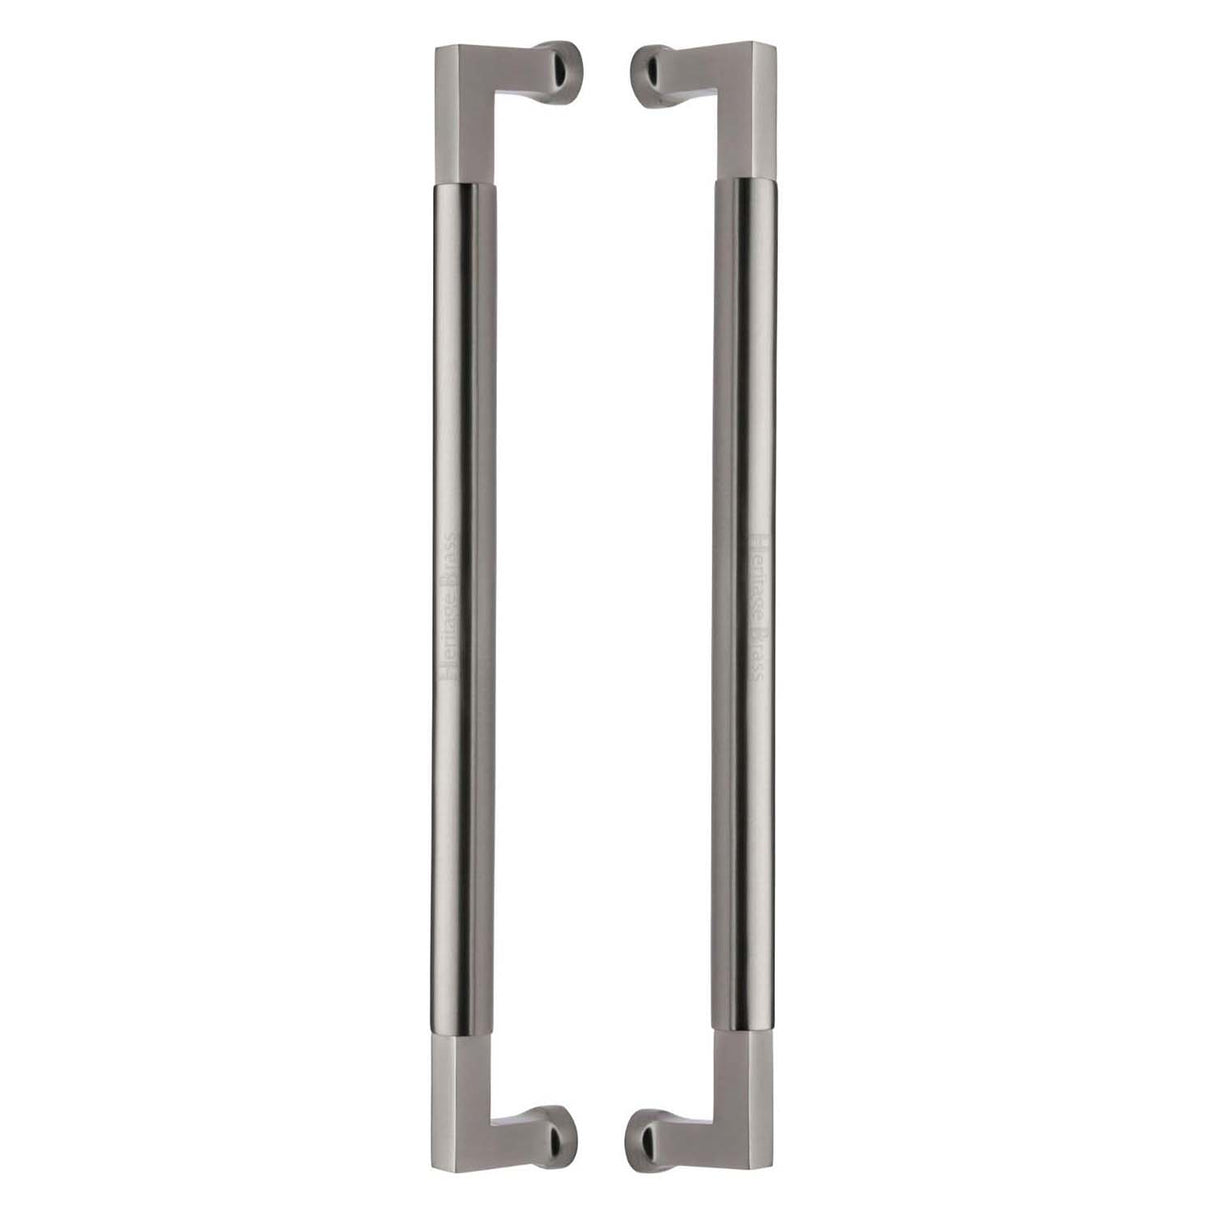 This is an image of a Heritage Brass - Door Pull Handle Bauhaus Design 483mm Satin Nickel Finish, btb1312-483-sn that is available to order from Trade Door Handles in Kendal.